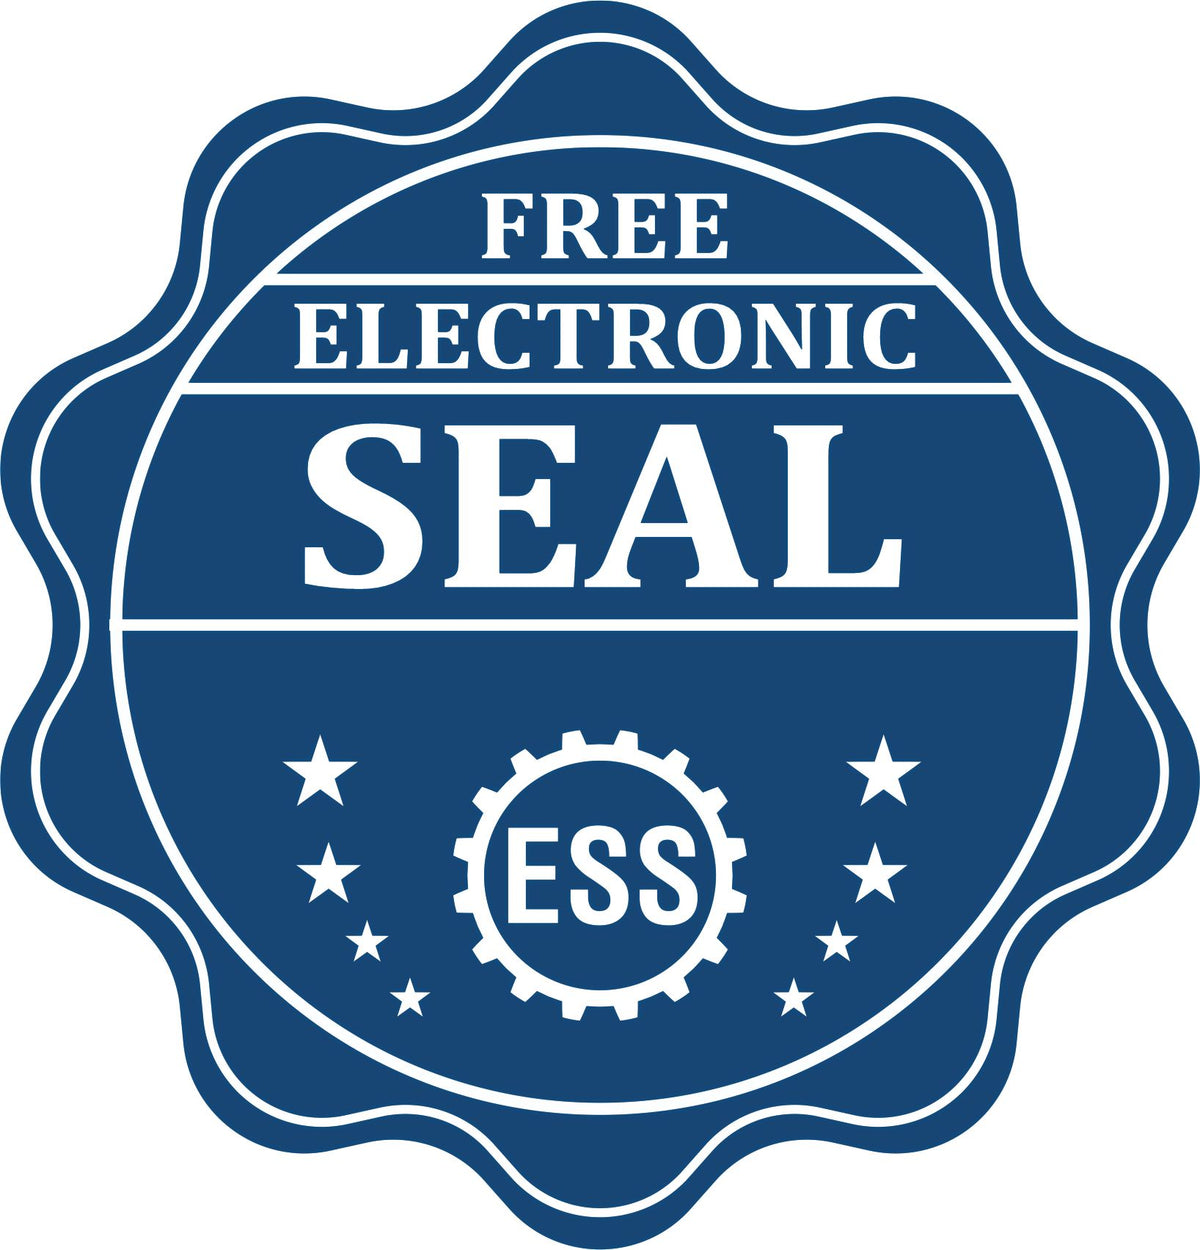 A badge showing a free electronic seal for the Gift New Hampshire Landscape Architect Seal with stars and the ESS gear on the emblem.